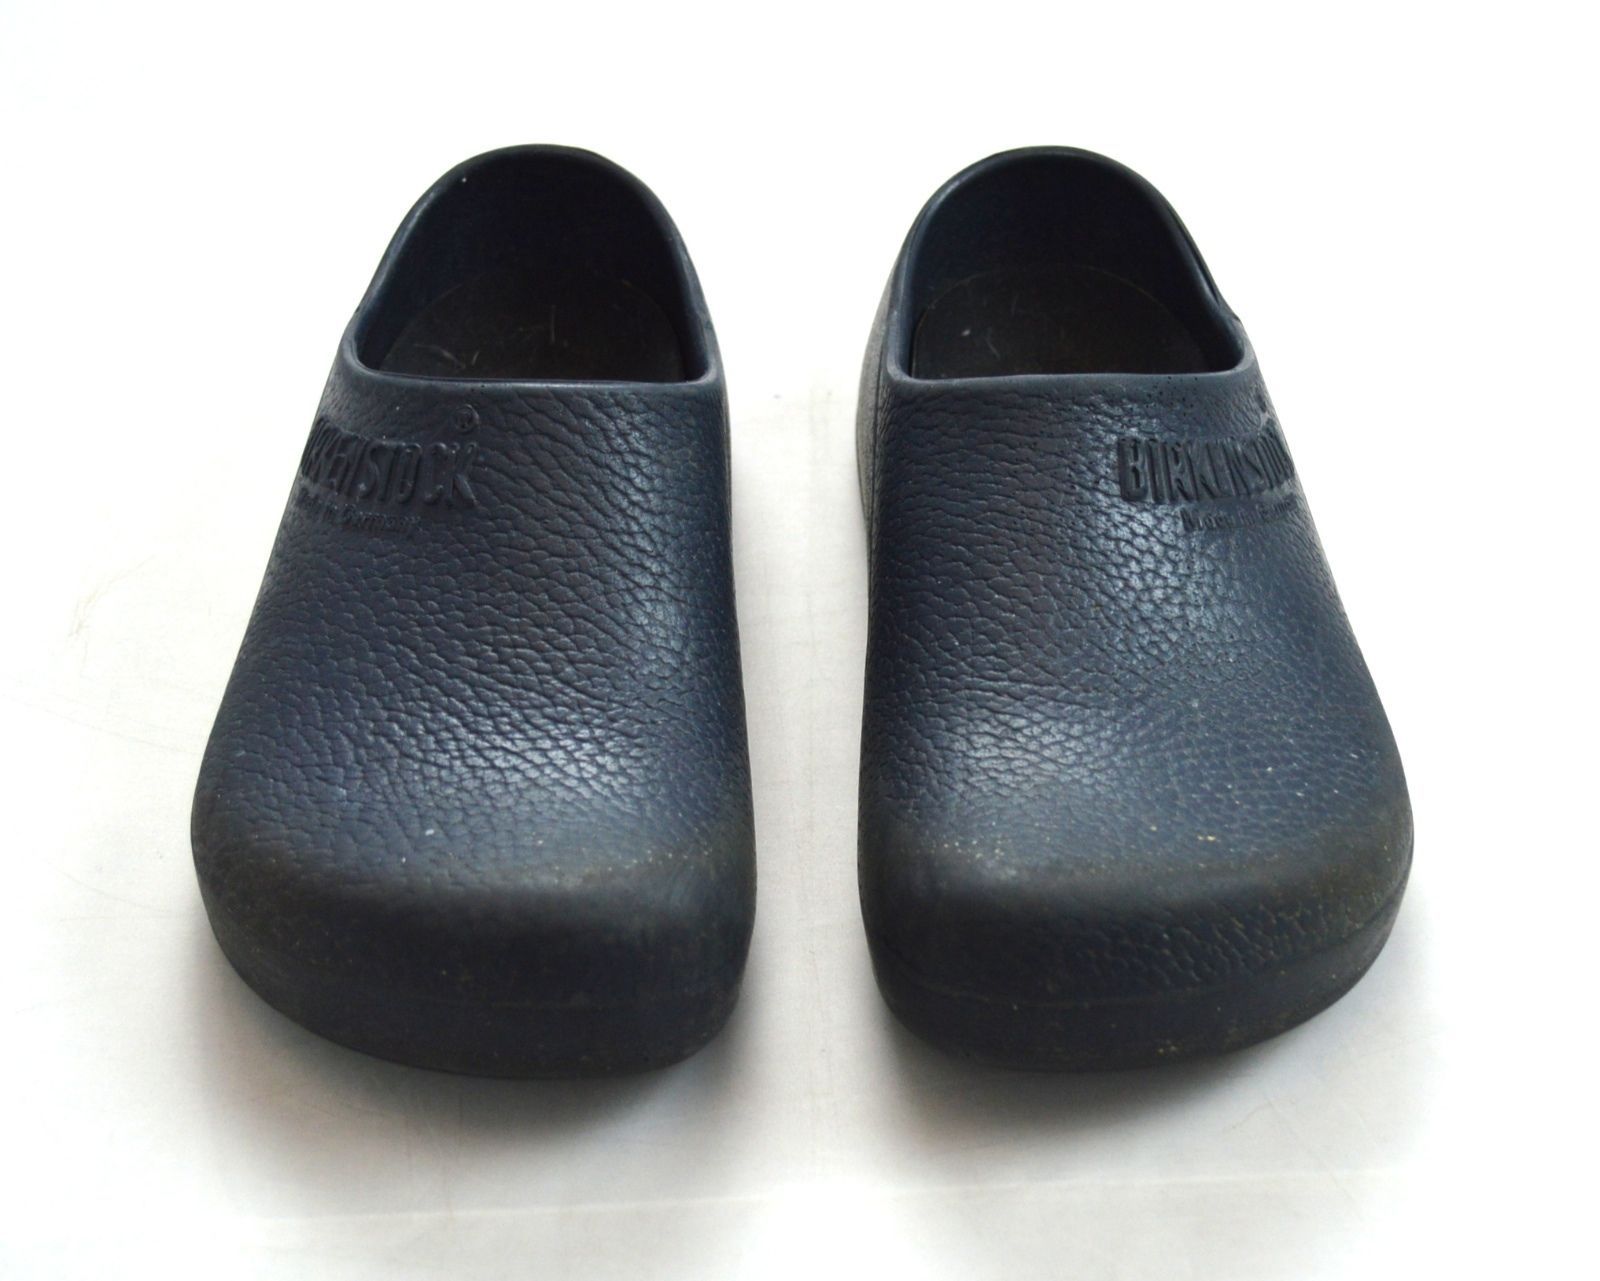 BIRKENSTOCK GERMANY Thick Blue Rubber Occupational Waterproof Clog ...